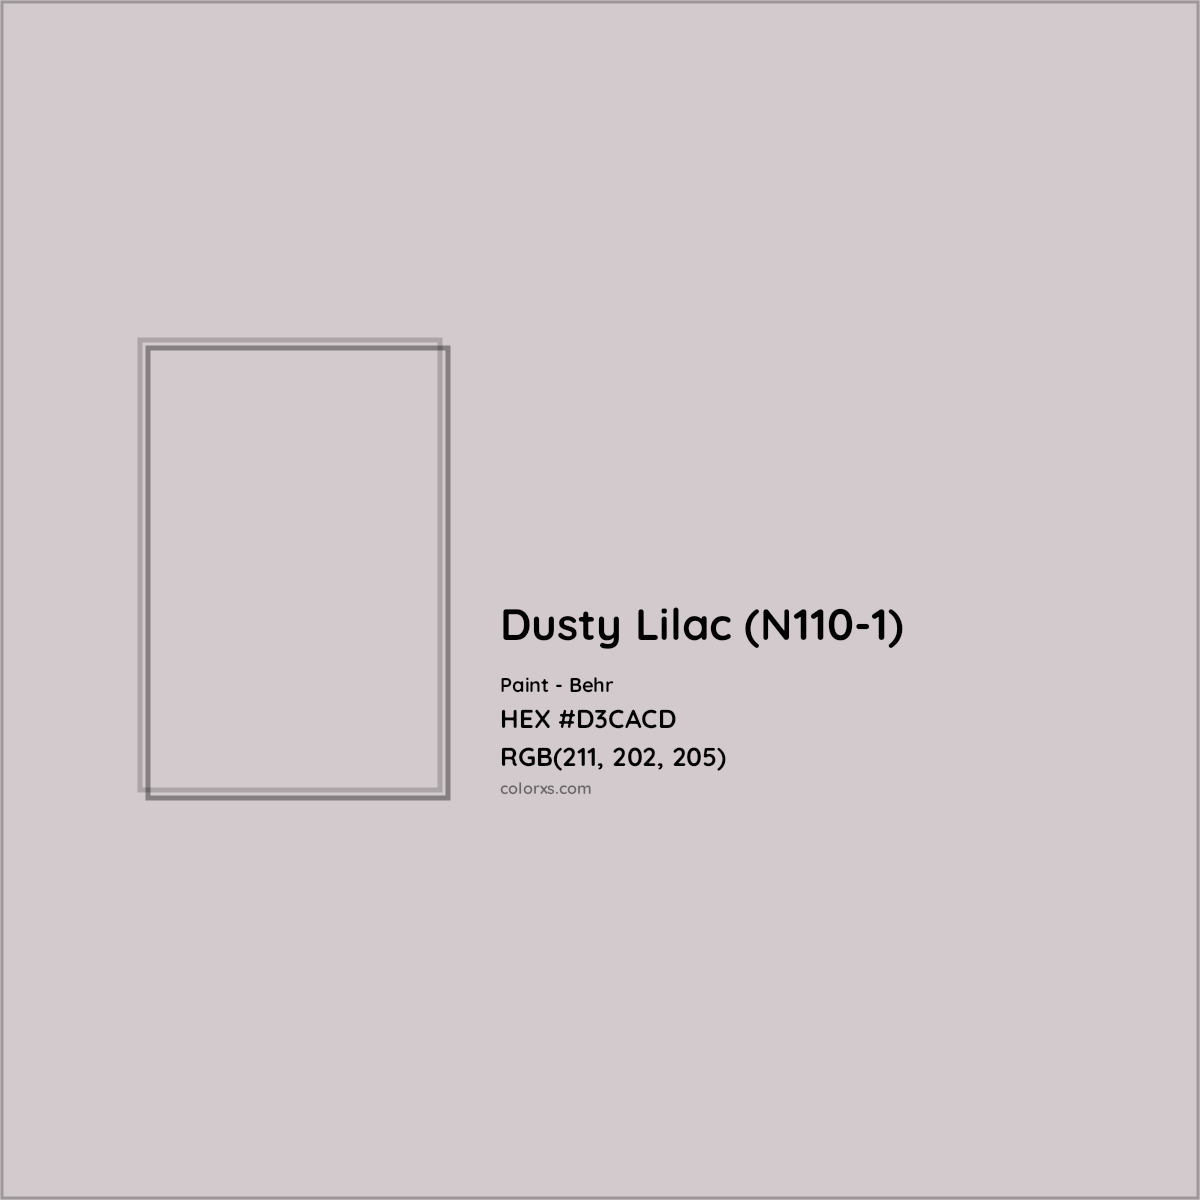 HEX #D3CACD Dusty Lilac (N110-1) Paint Behr - Color Code